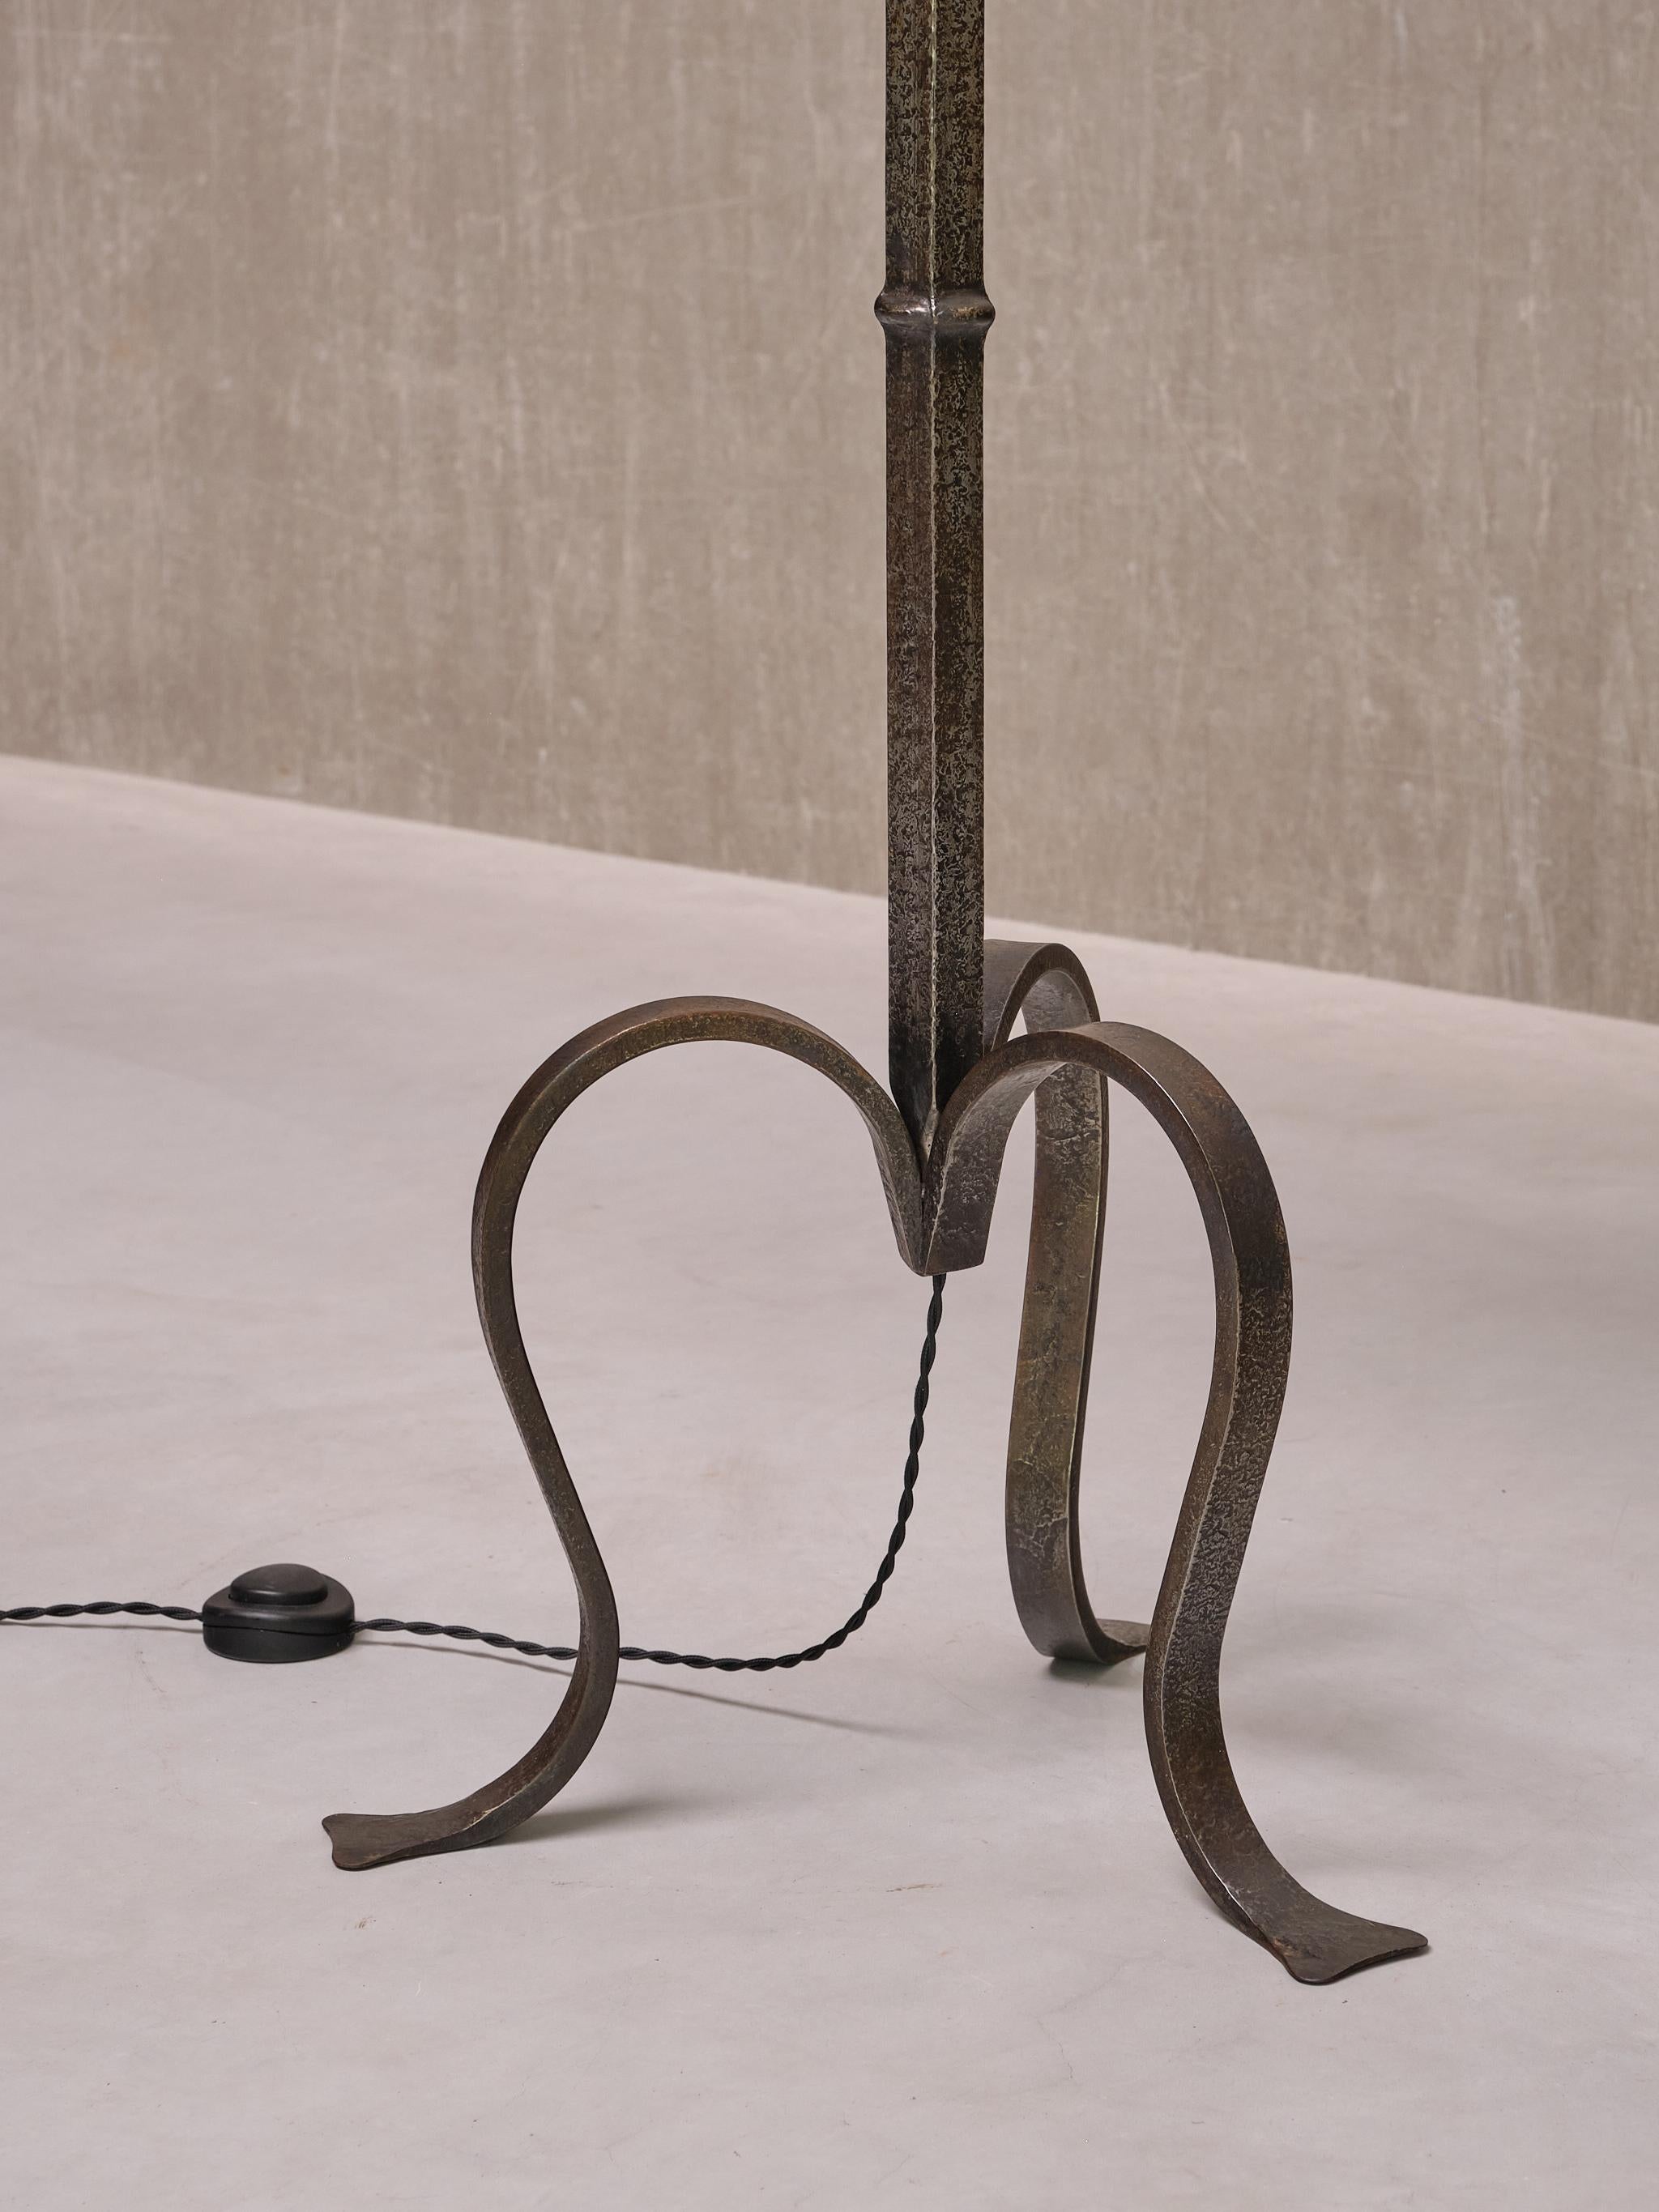 Mid-20th Century Sculptural French Modern Three Legged Floor Lamp in Wrought Iron, 1950s For Sale